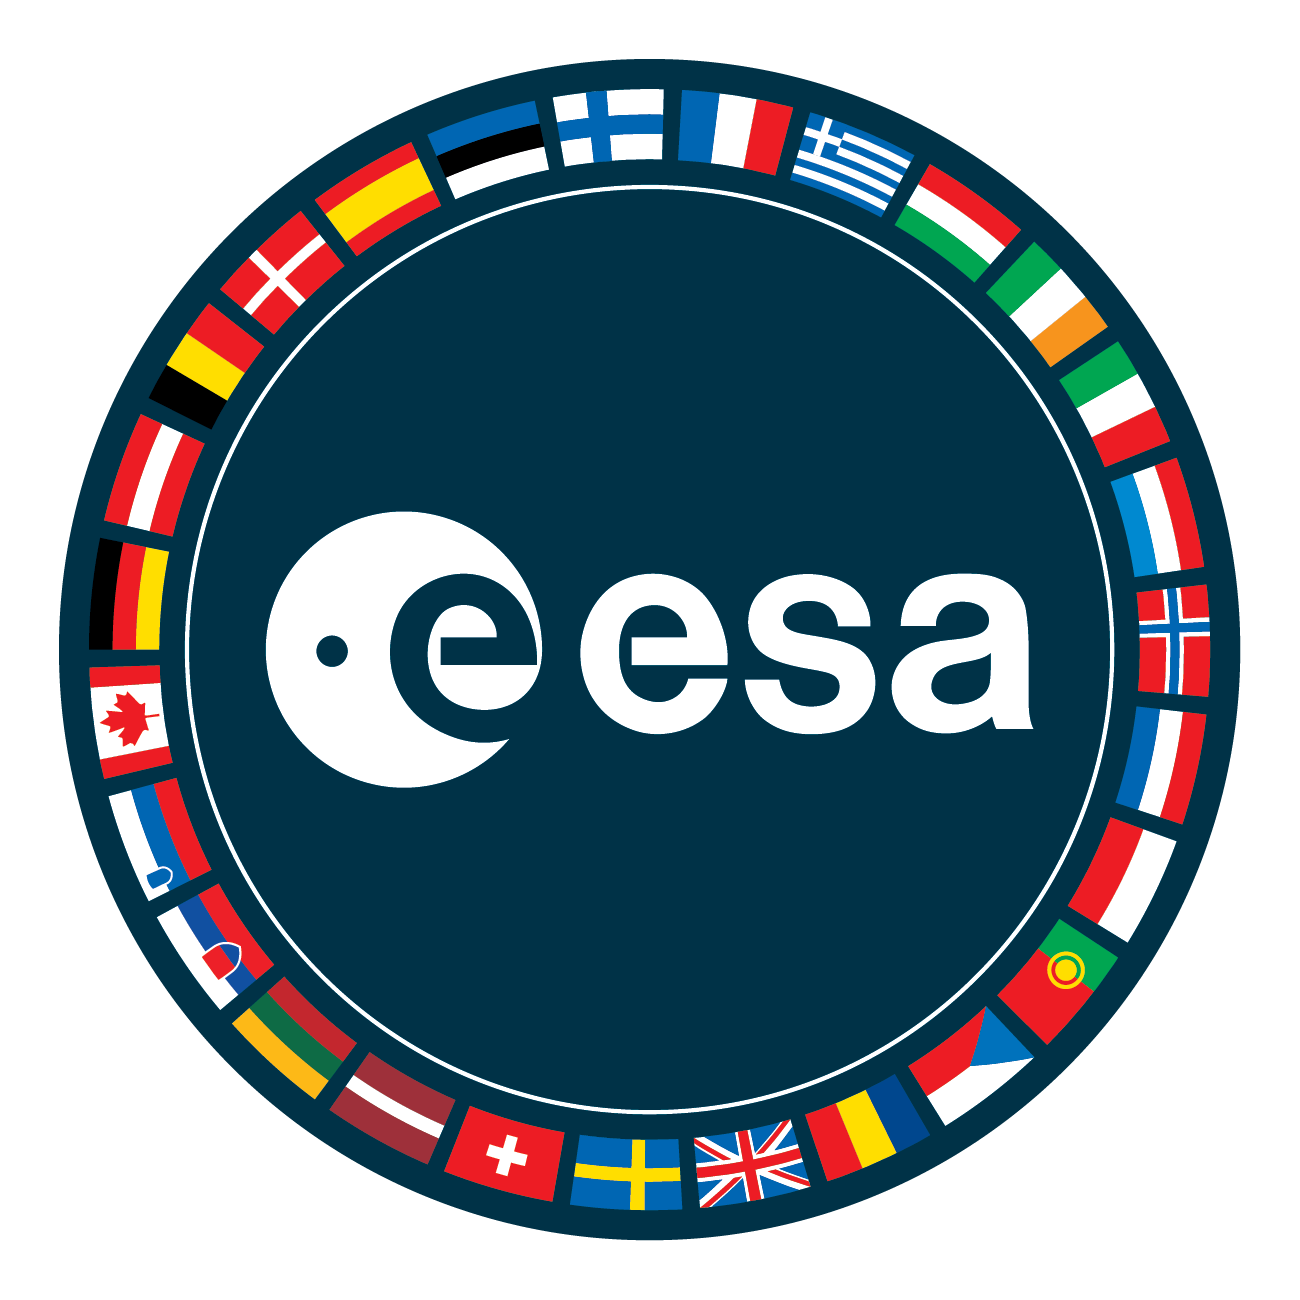 ESA patch representing the ESA logo surrounded by the flags of ESA’s Member States.